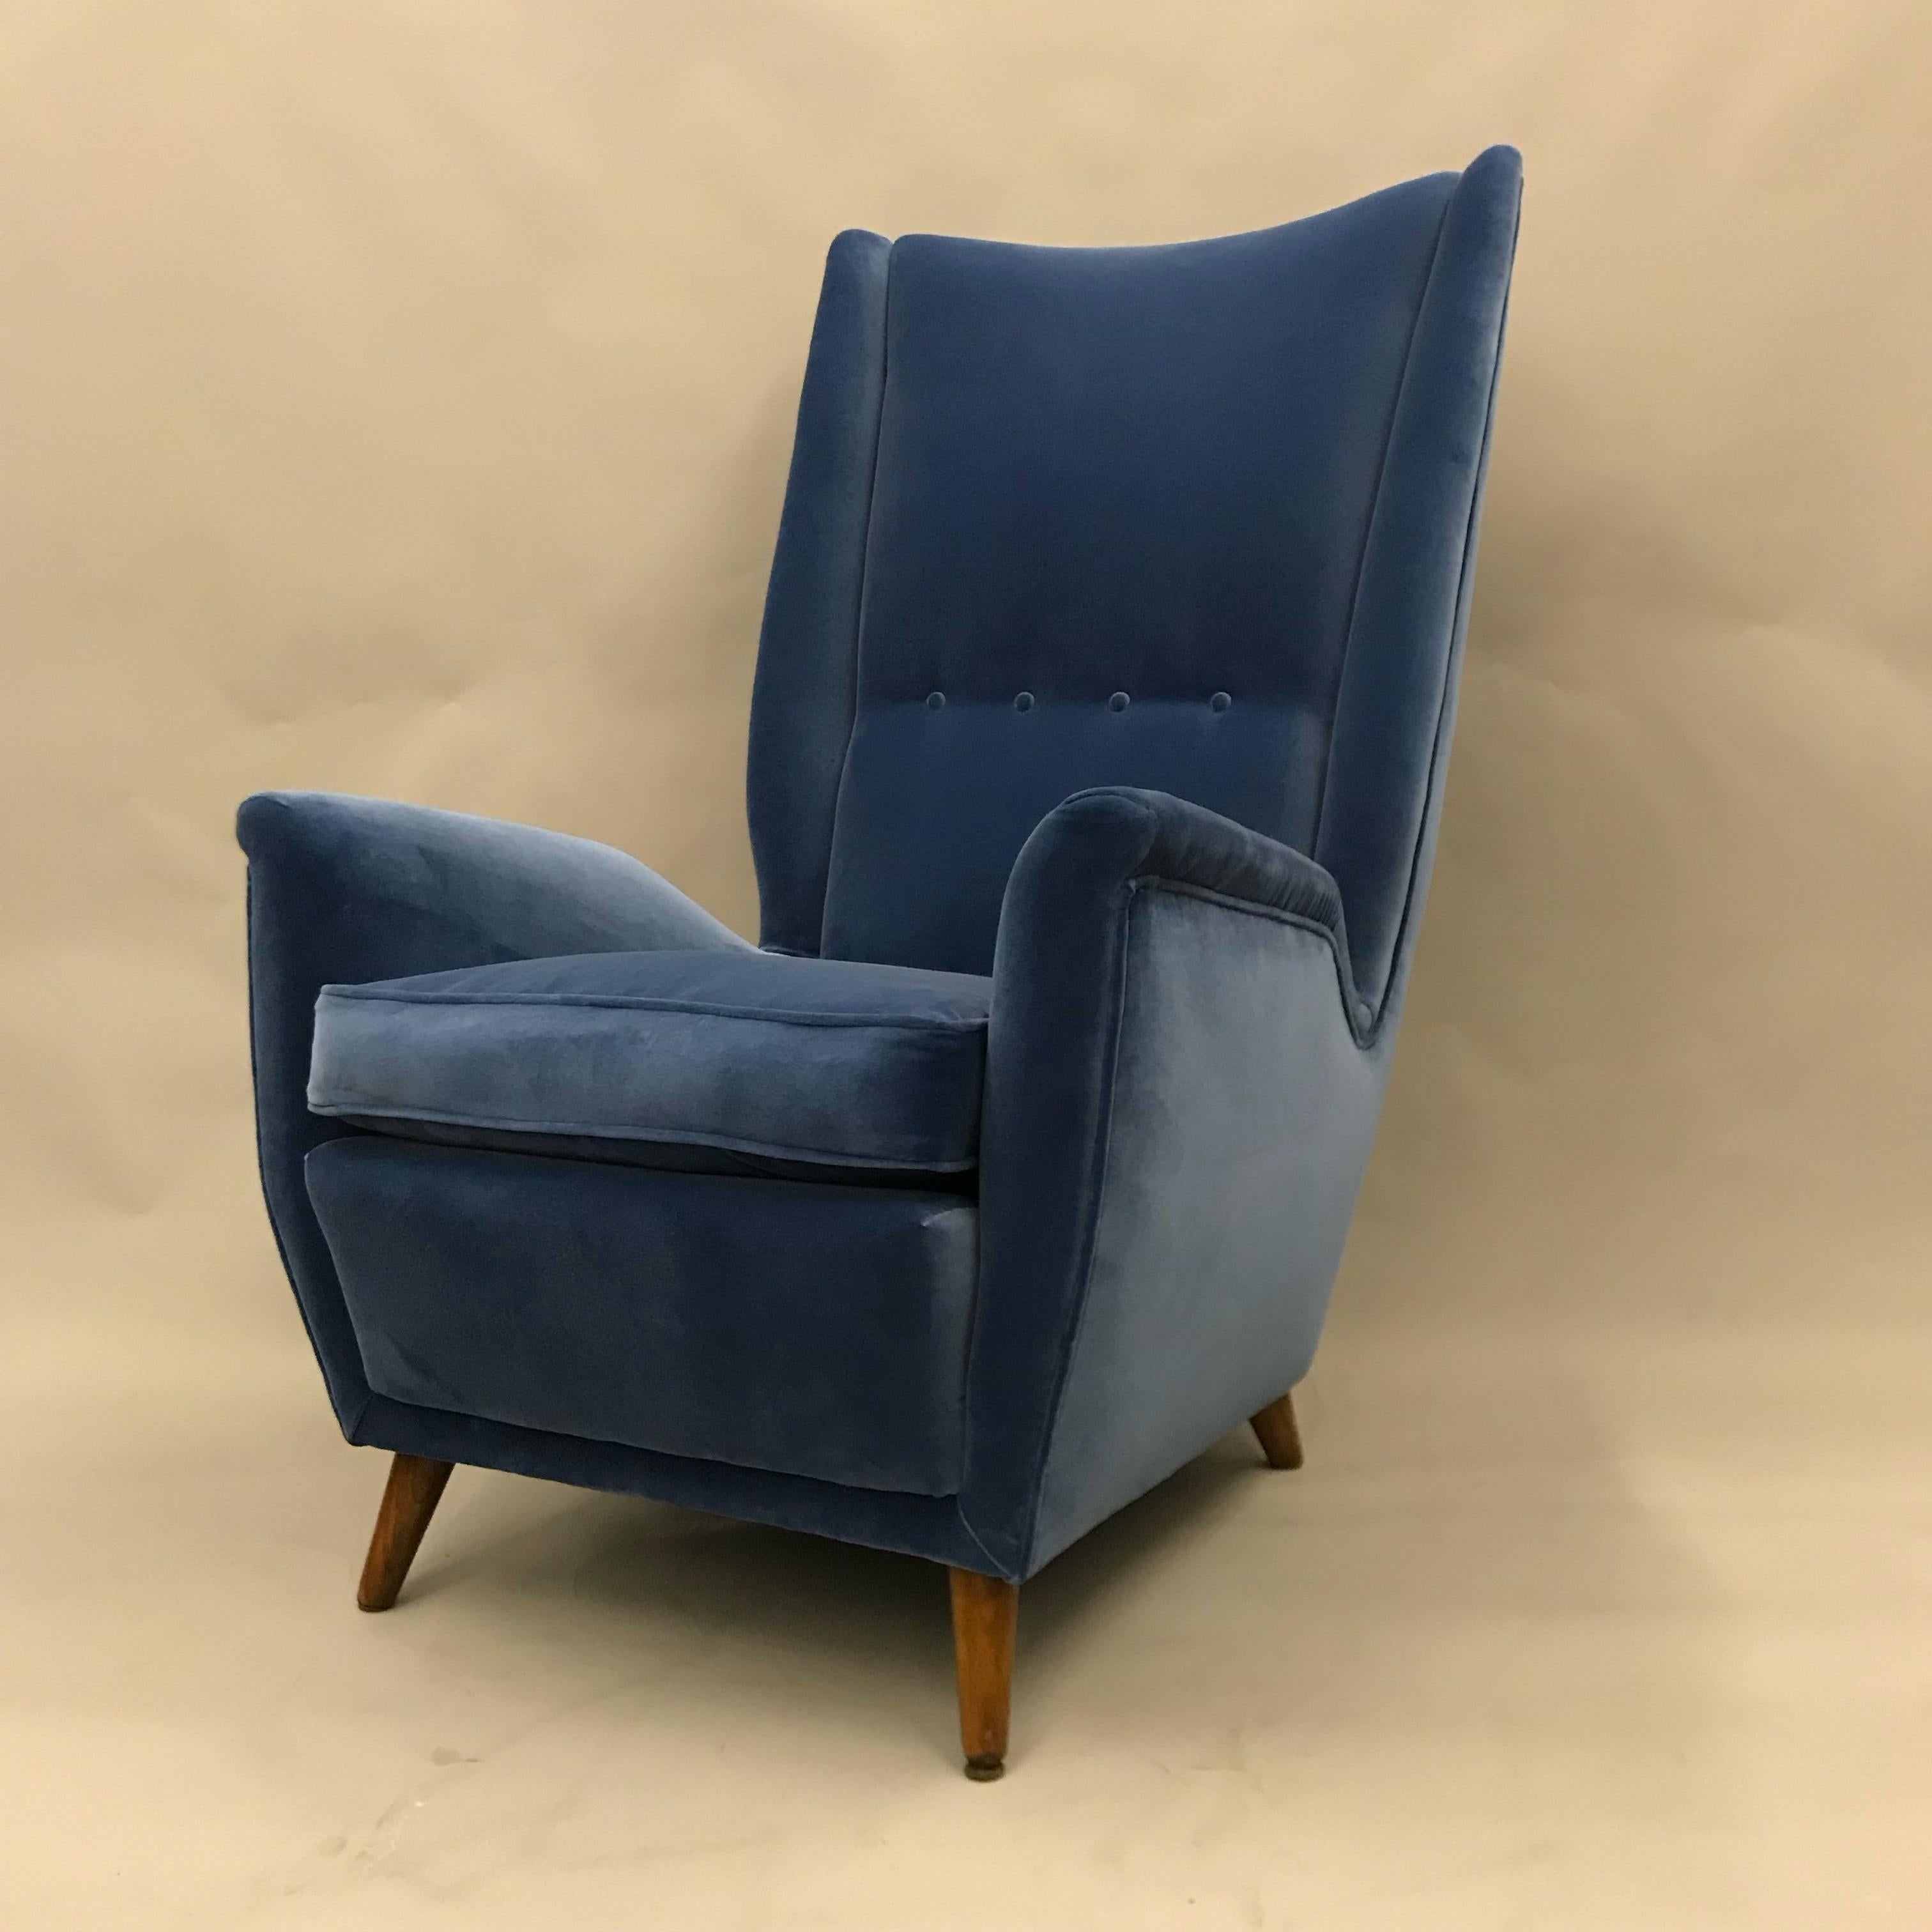 Mid-Century Modern Giò Ponti's High Back Armchair for Isa Bergamo, Italy 1950s For Sale